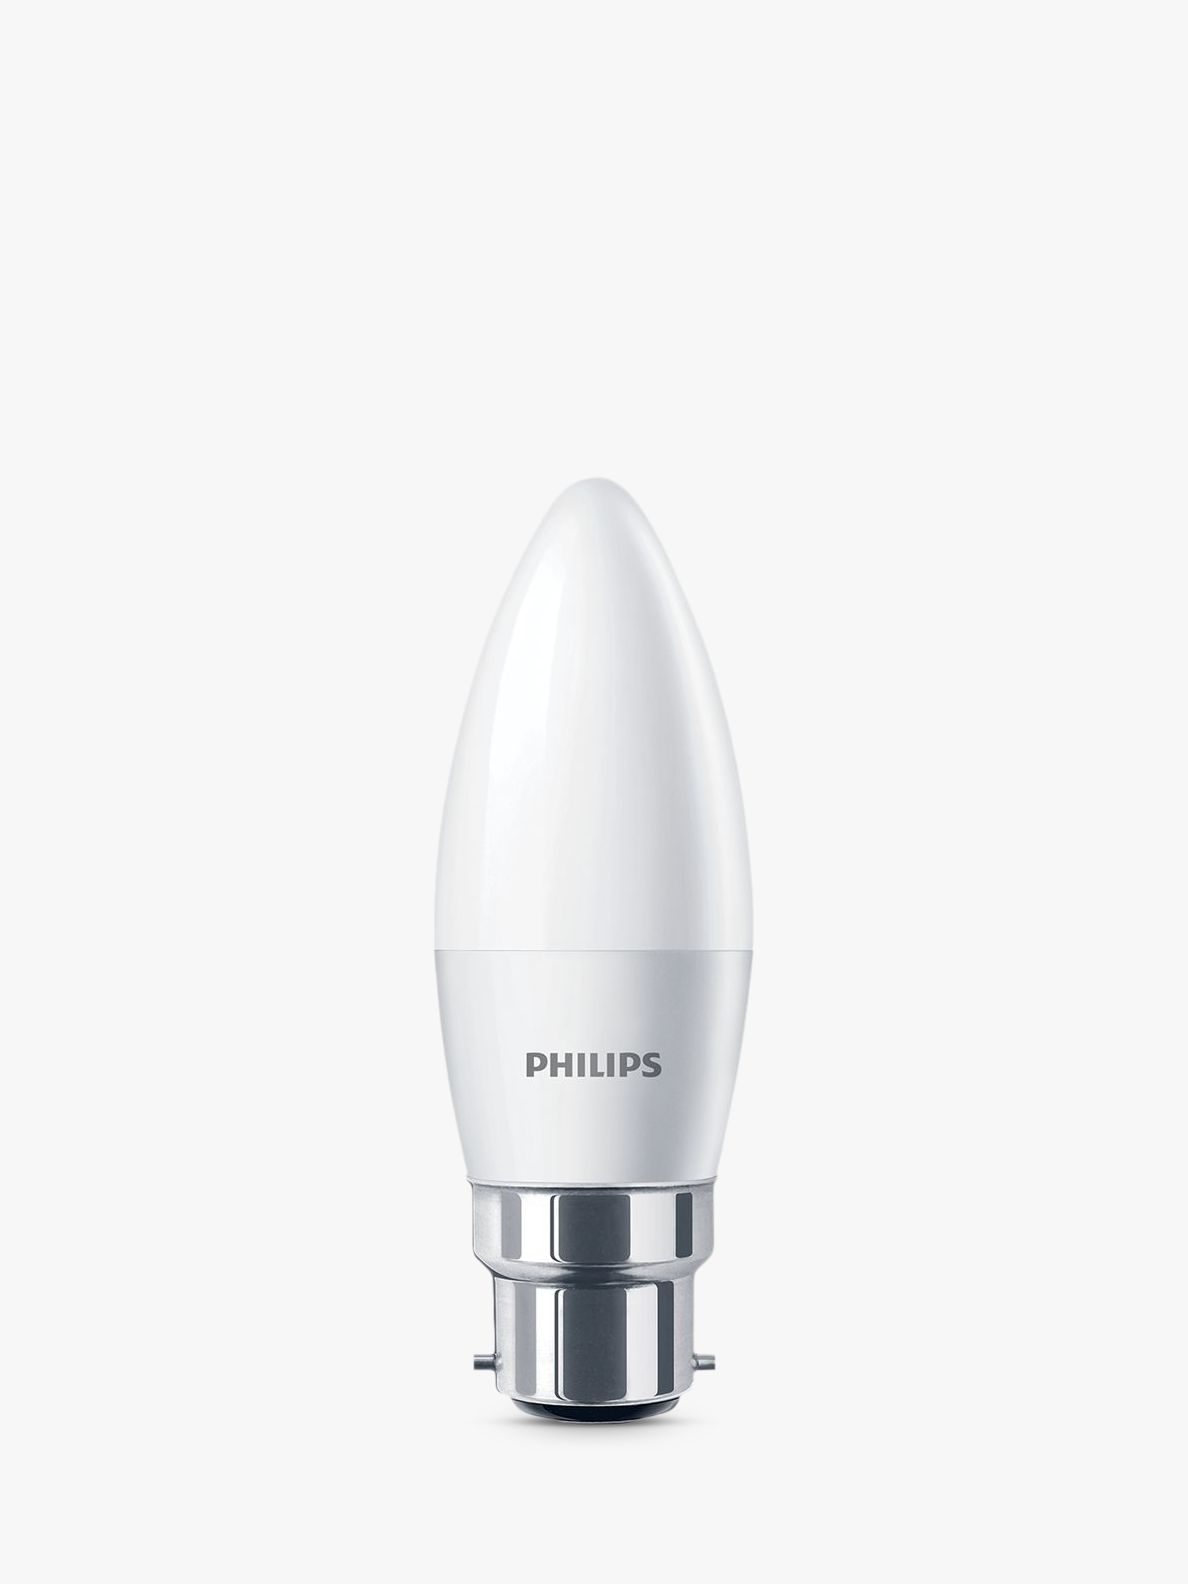 Photo of Philips 5w bc candle light bulb frosted